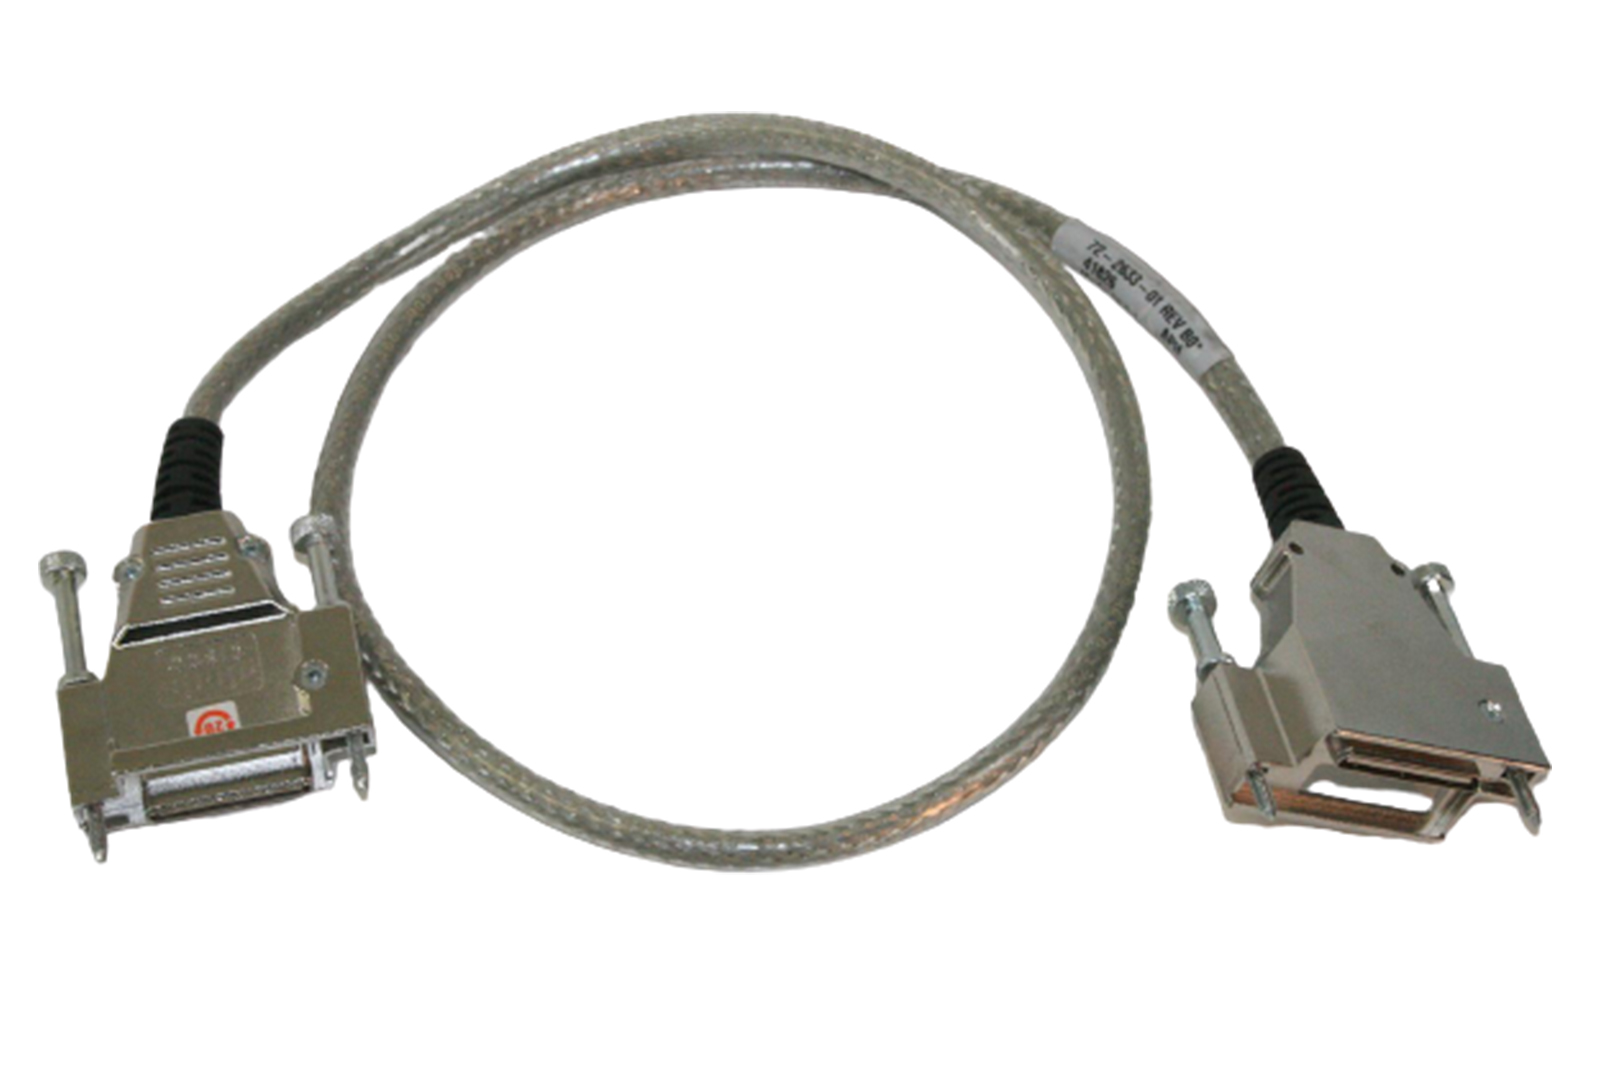 72-2633-01 | Cisco CAB-STACK-1M Stackwise 1M Stacking Cable